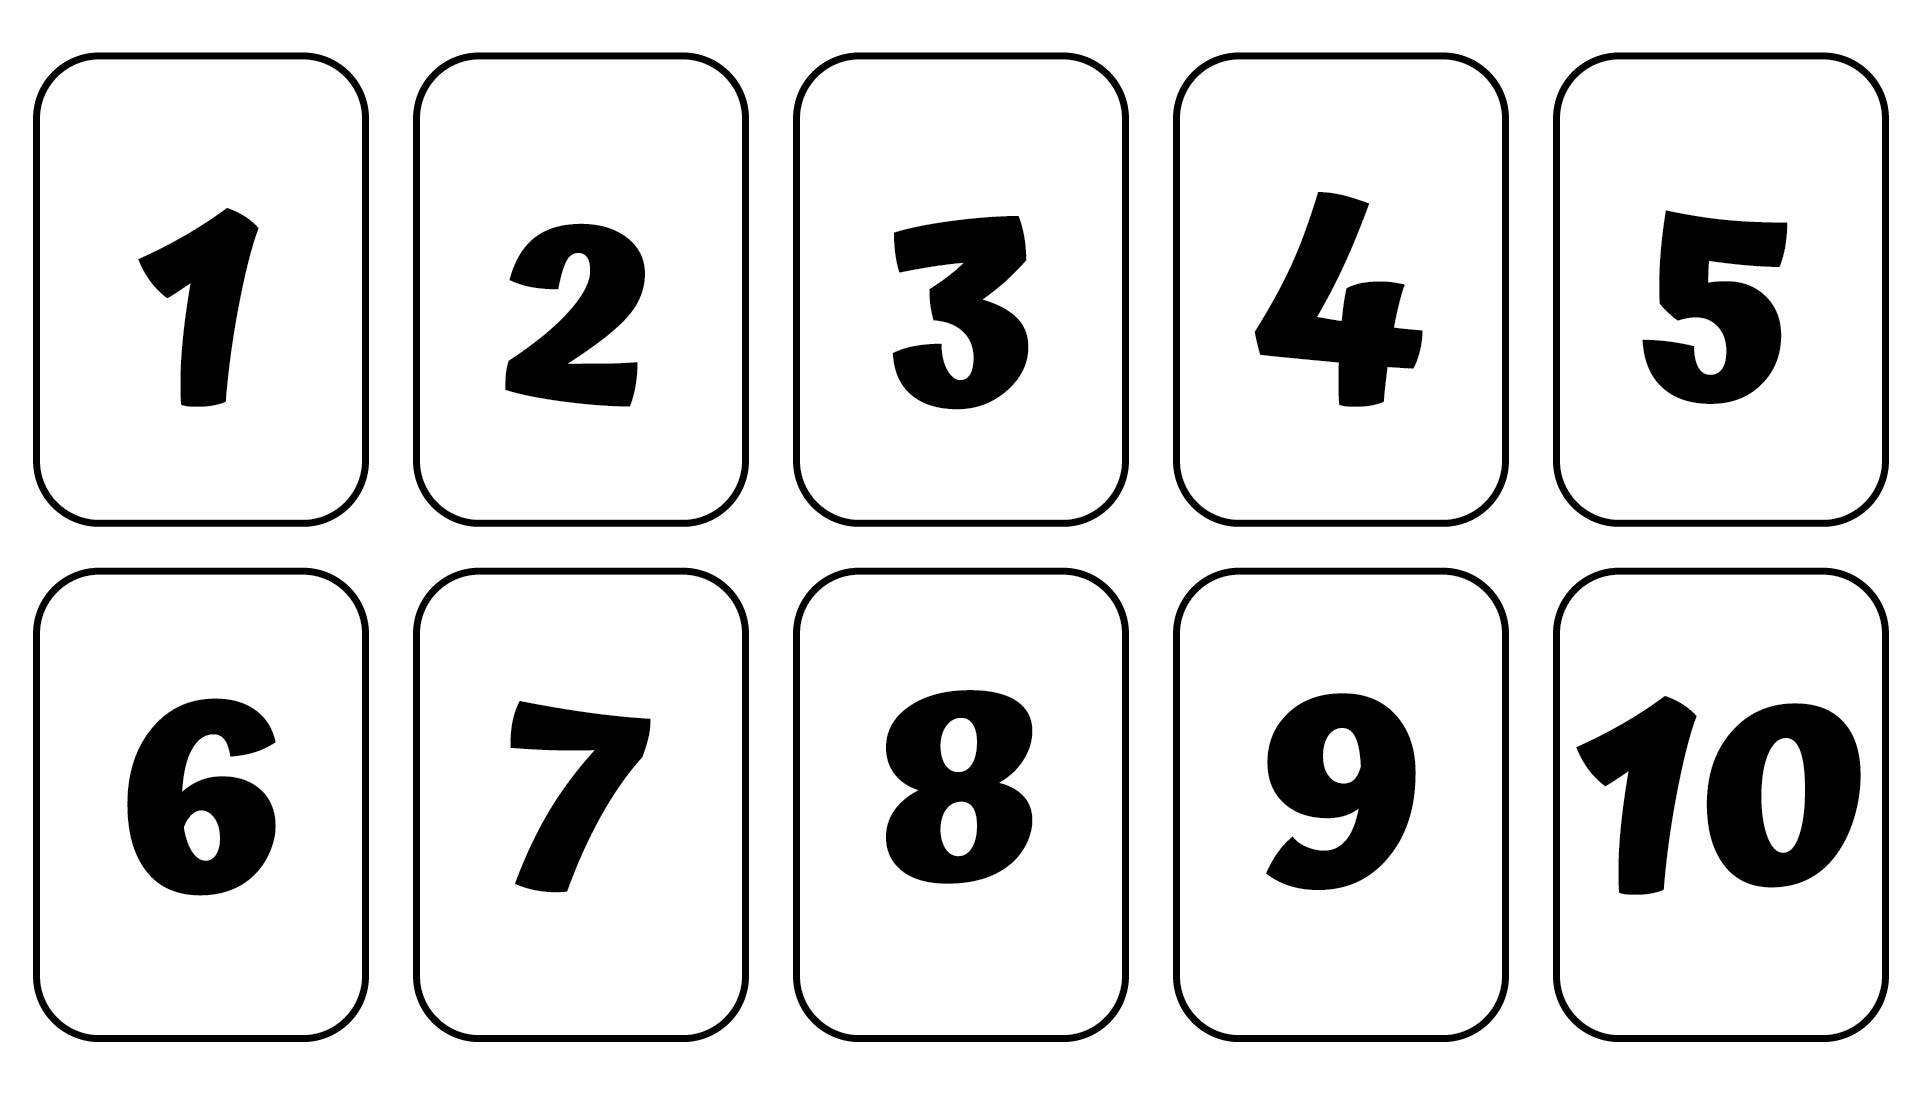 8-best-images-of-printable-very-large-numbers-1-10-large-printable-numbers-1-10-black-large